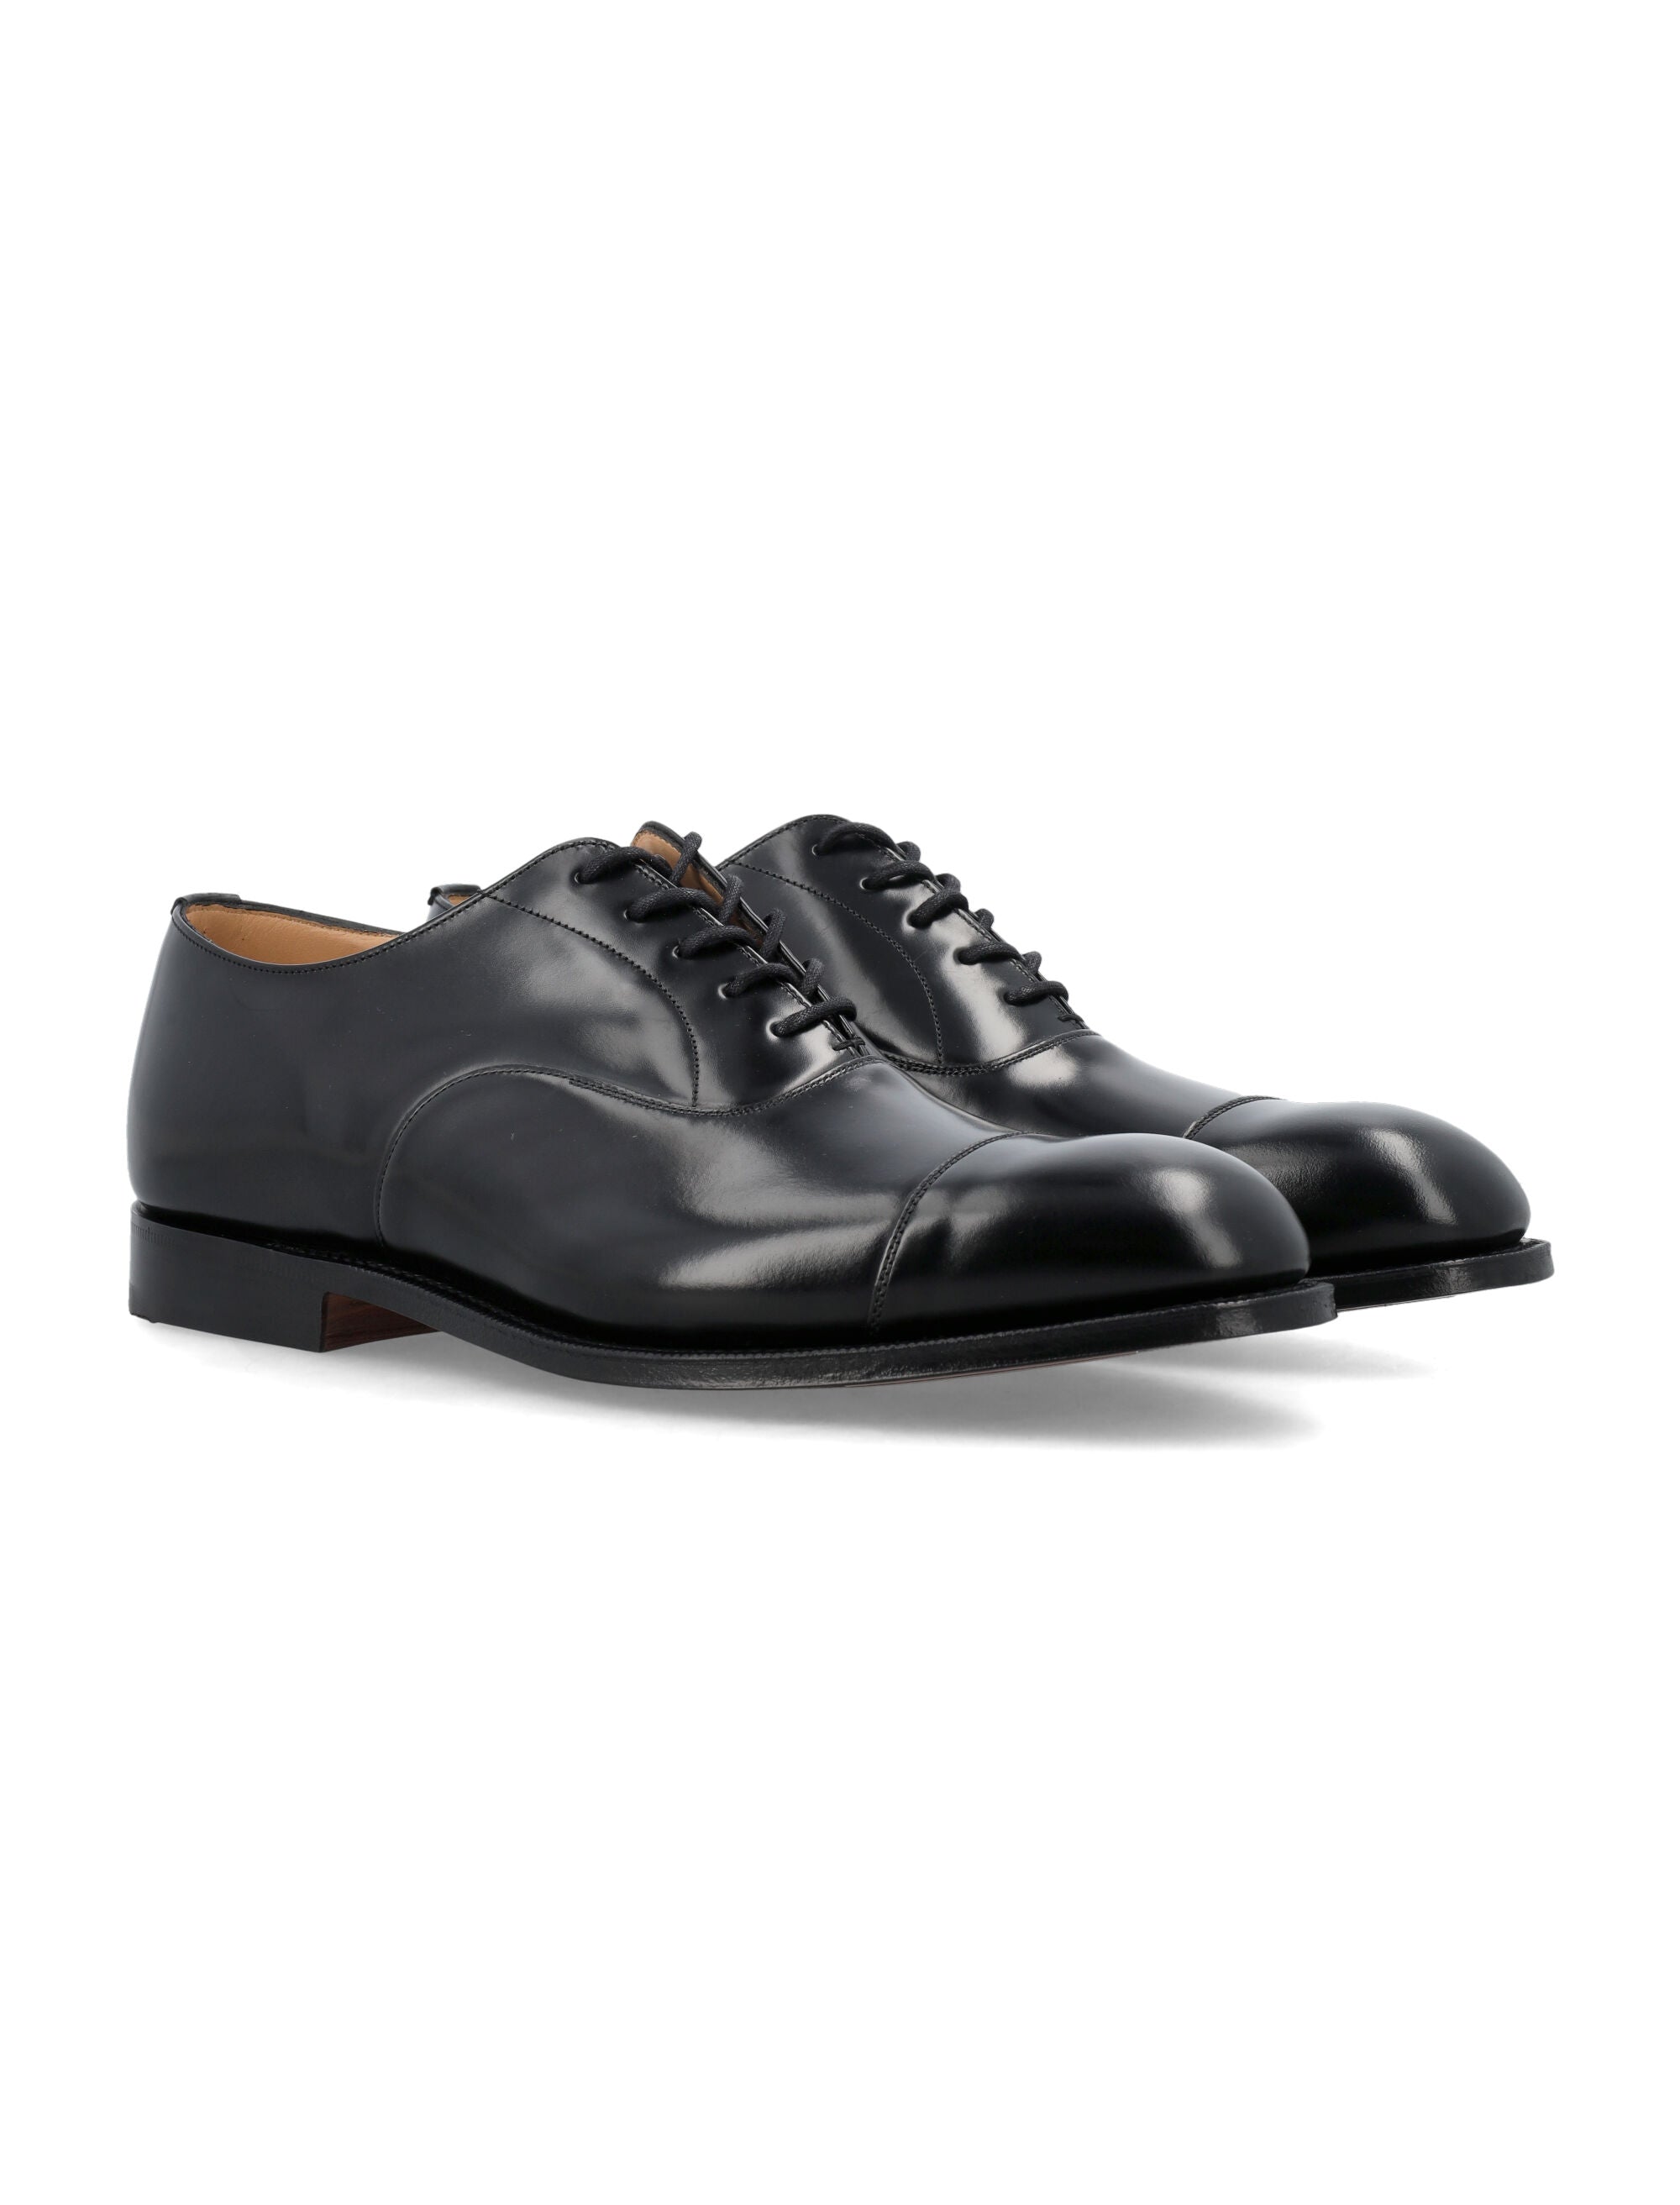 Shop Church's Black Leather Derby Dress Shoes With Classic Stitching And Cotton Laces